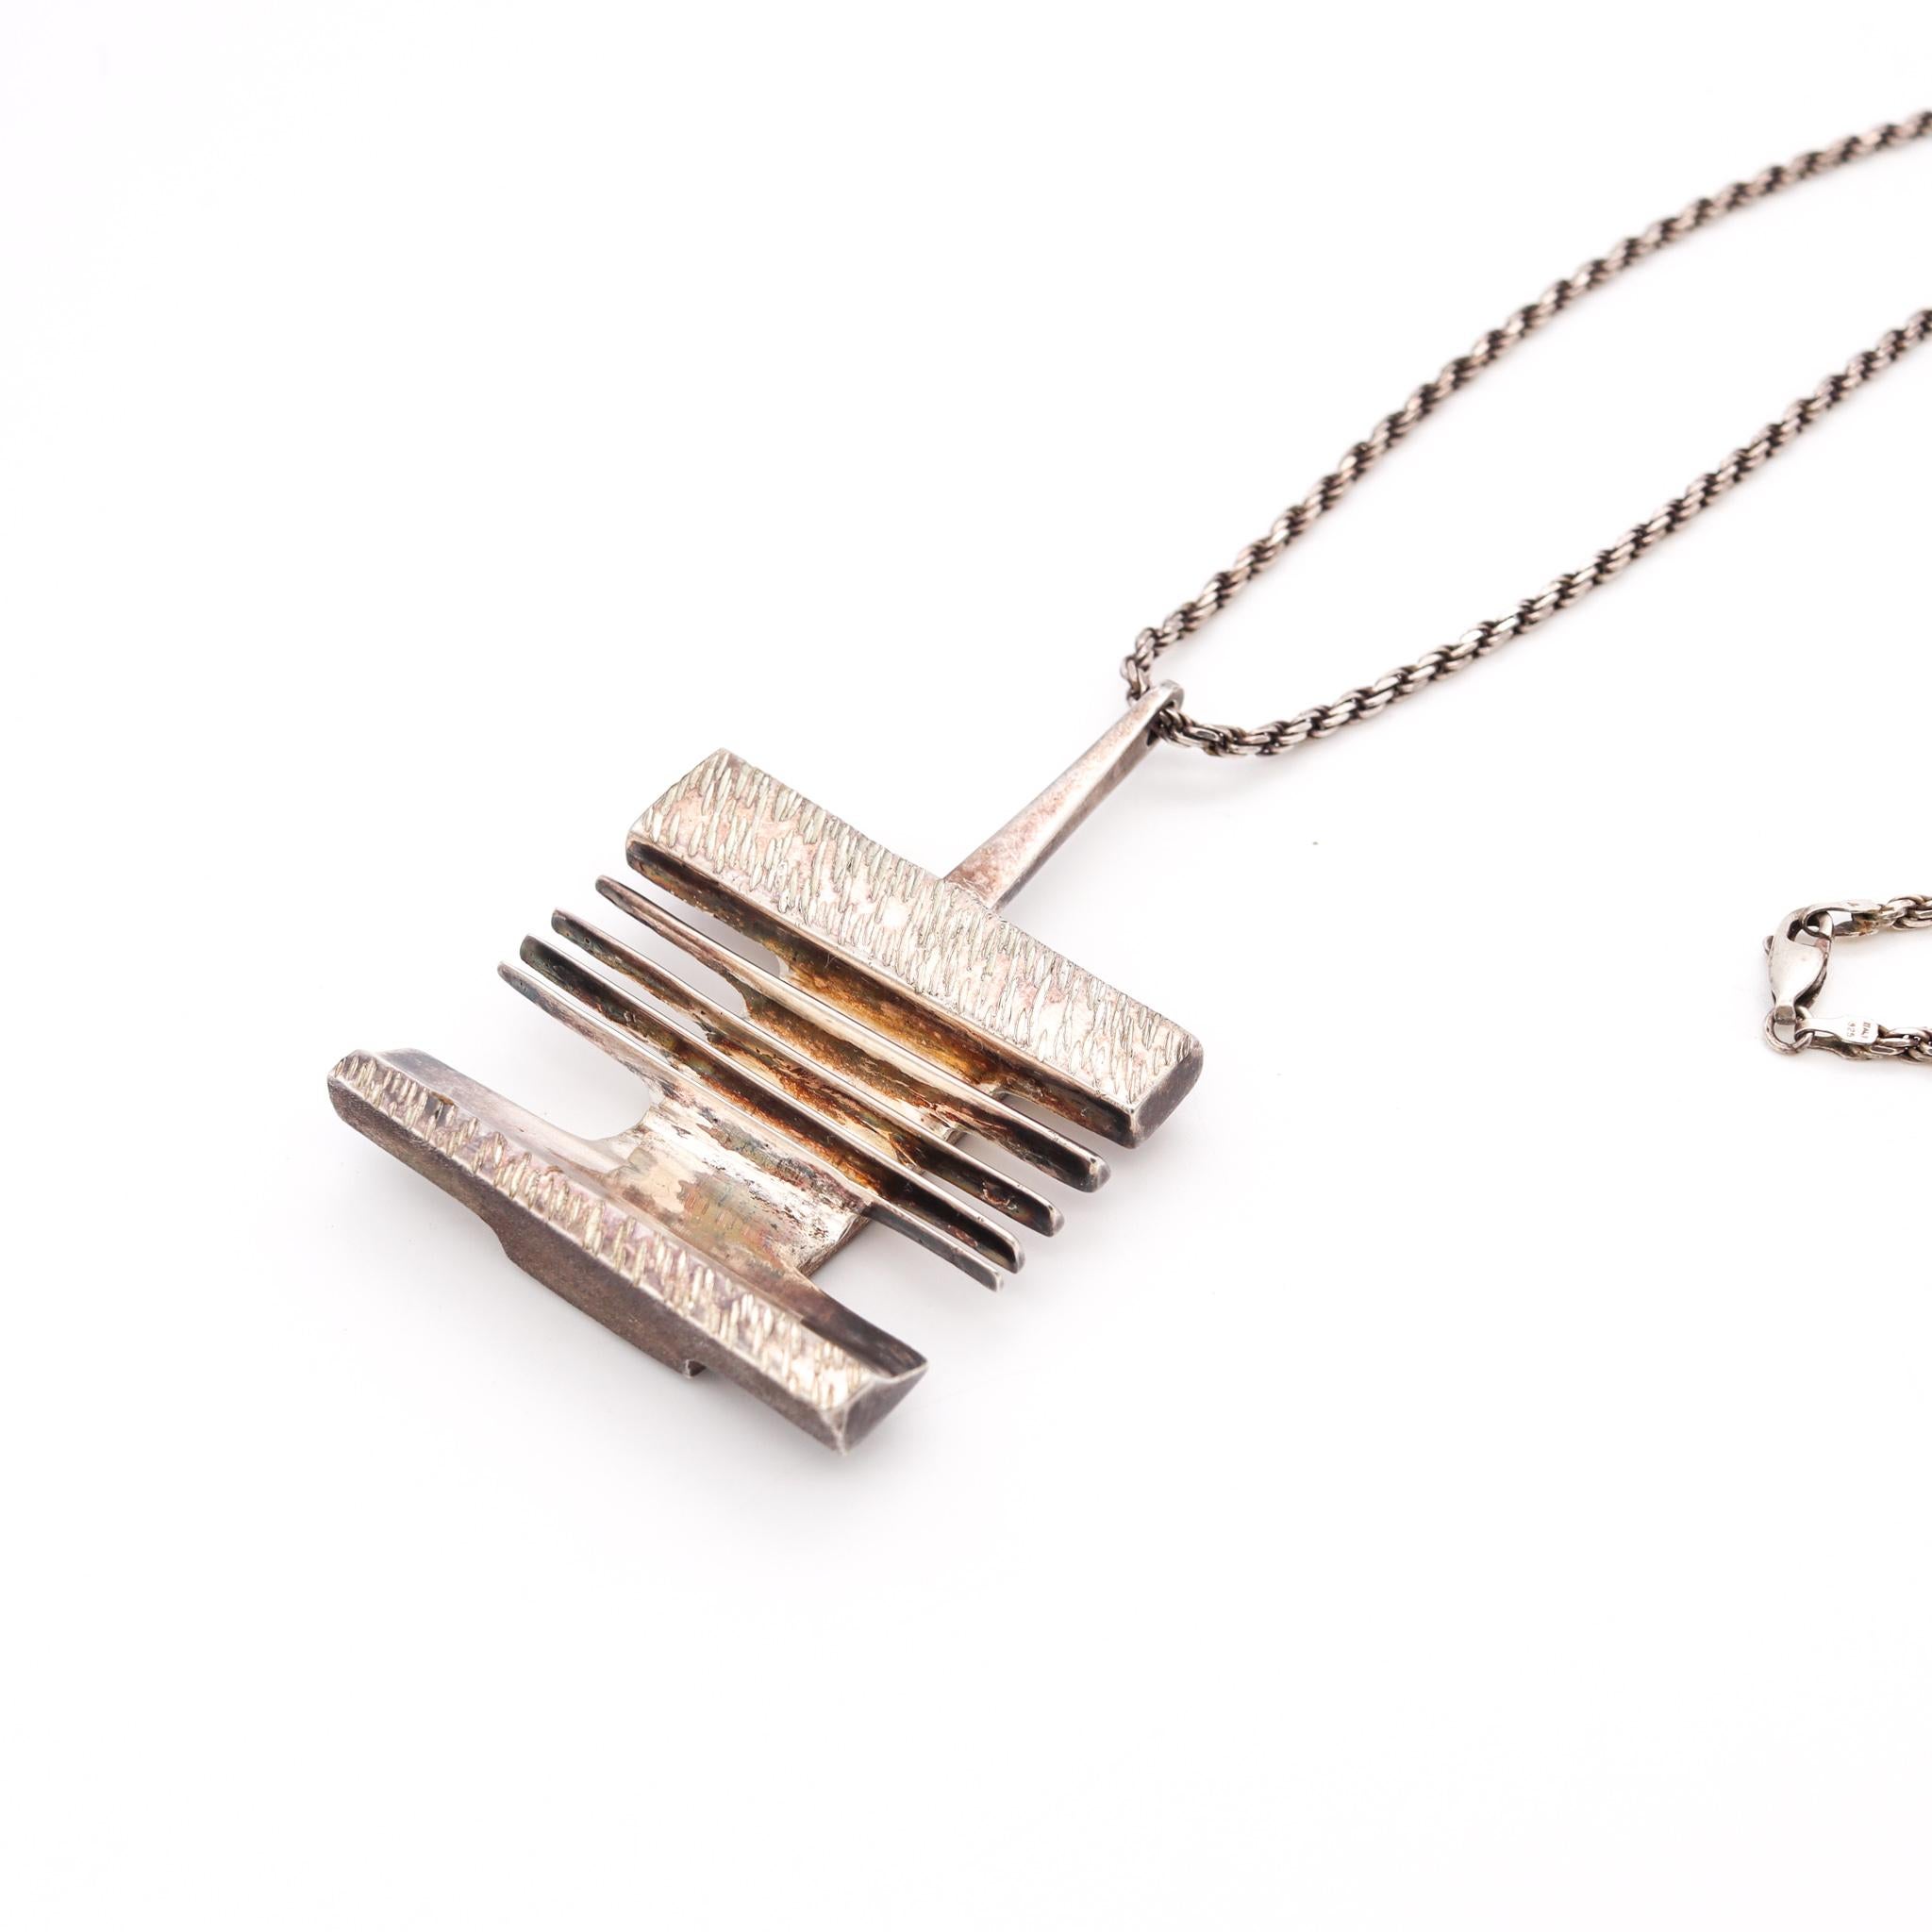 Scandinavian Artist Jine 1970 Geometric Pendant Necklace in .925 Sterling Silver In Excellent Condition For Sale In Miami, FL